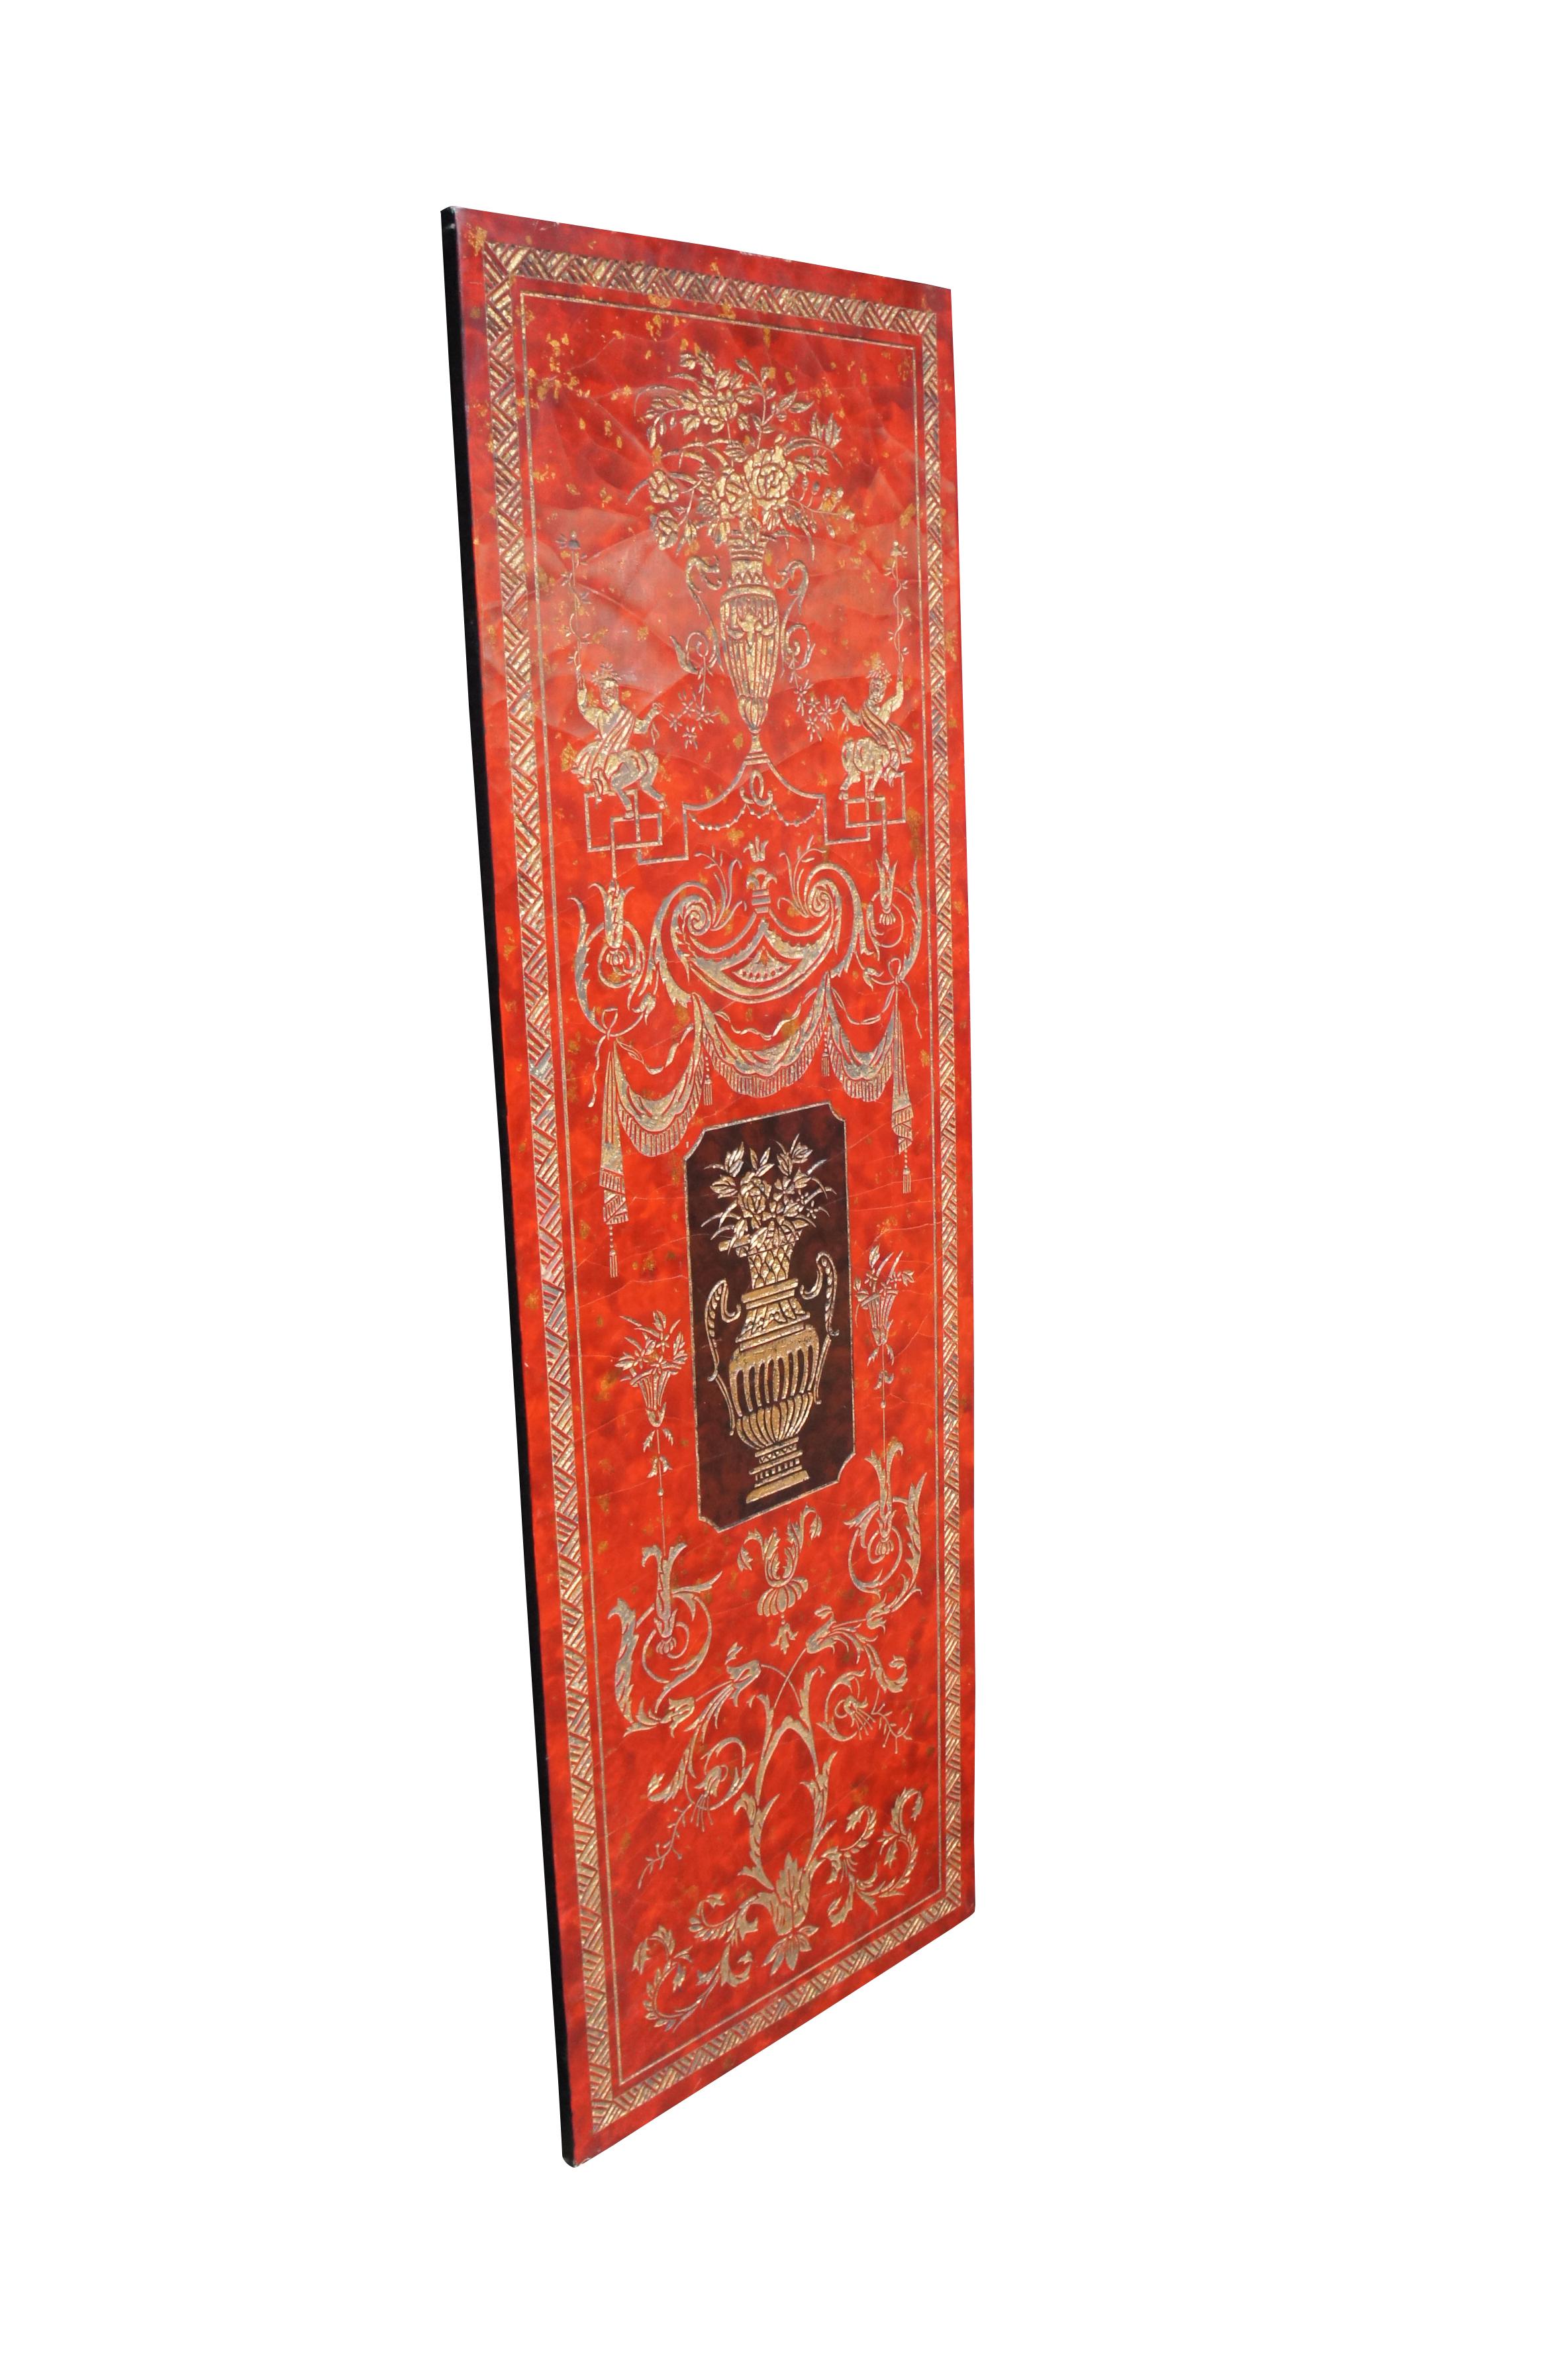 Impressive pair of late 20th century wall hanging panels.  Features Neoclassical and French styling.  The screen is red lacquered with a marbled appearance and engraved in gold designs with ornate urns, acanthus accents and Centaurs (half man half